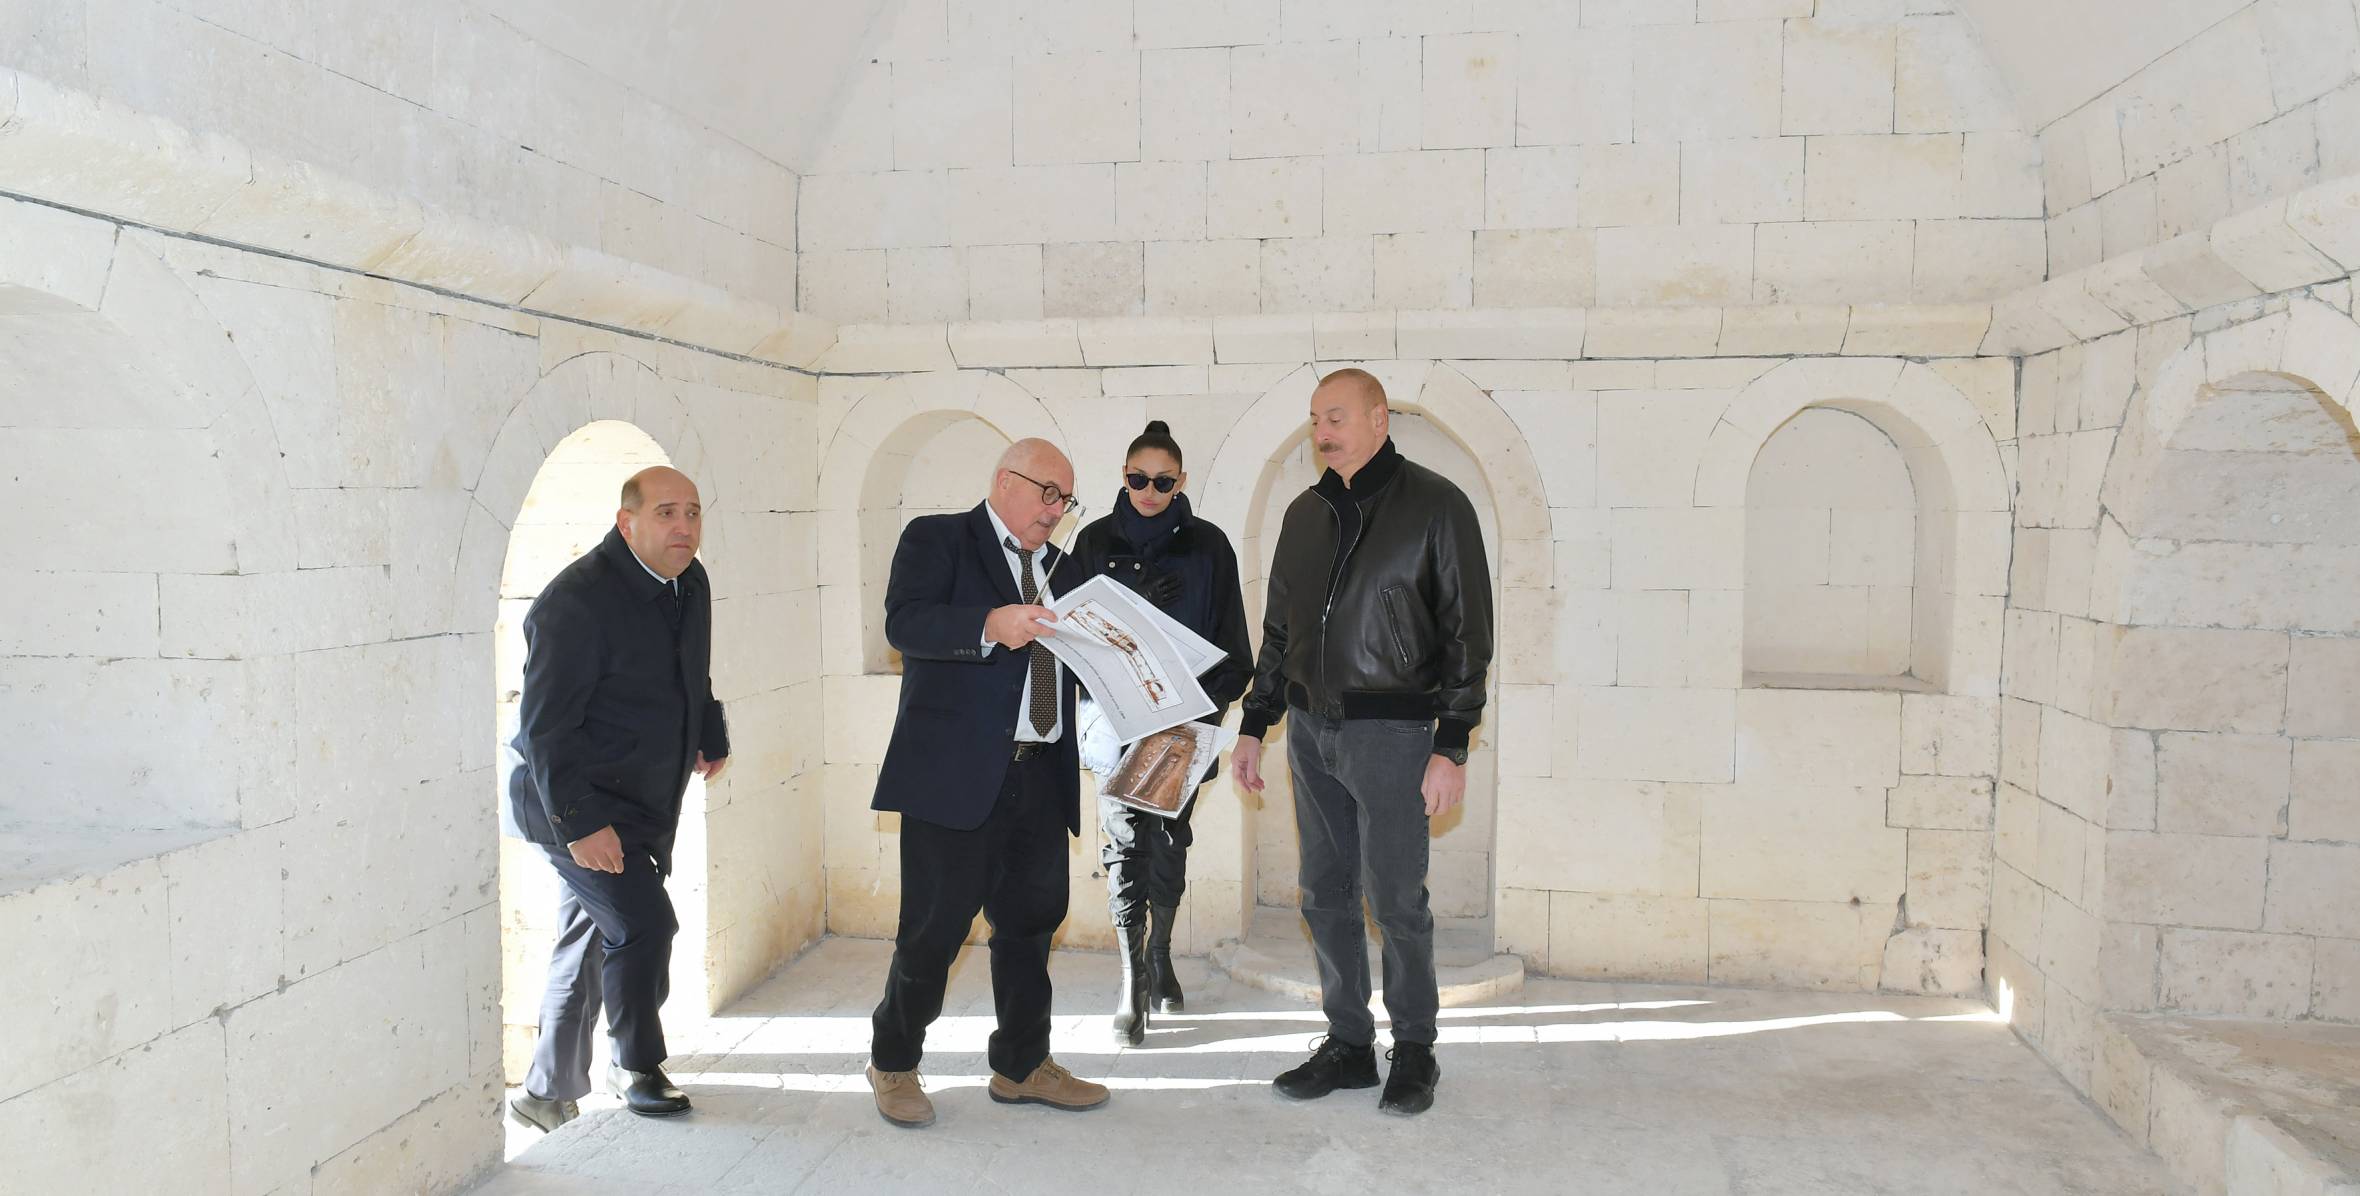 Ilham Aliyev and First Lady Mehriban Aliyeva have examined the ongoing repair and restoration works at the Imarat Complex in the city of Aghdam